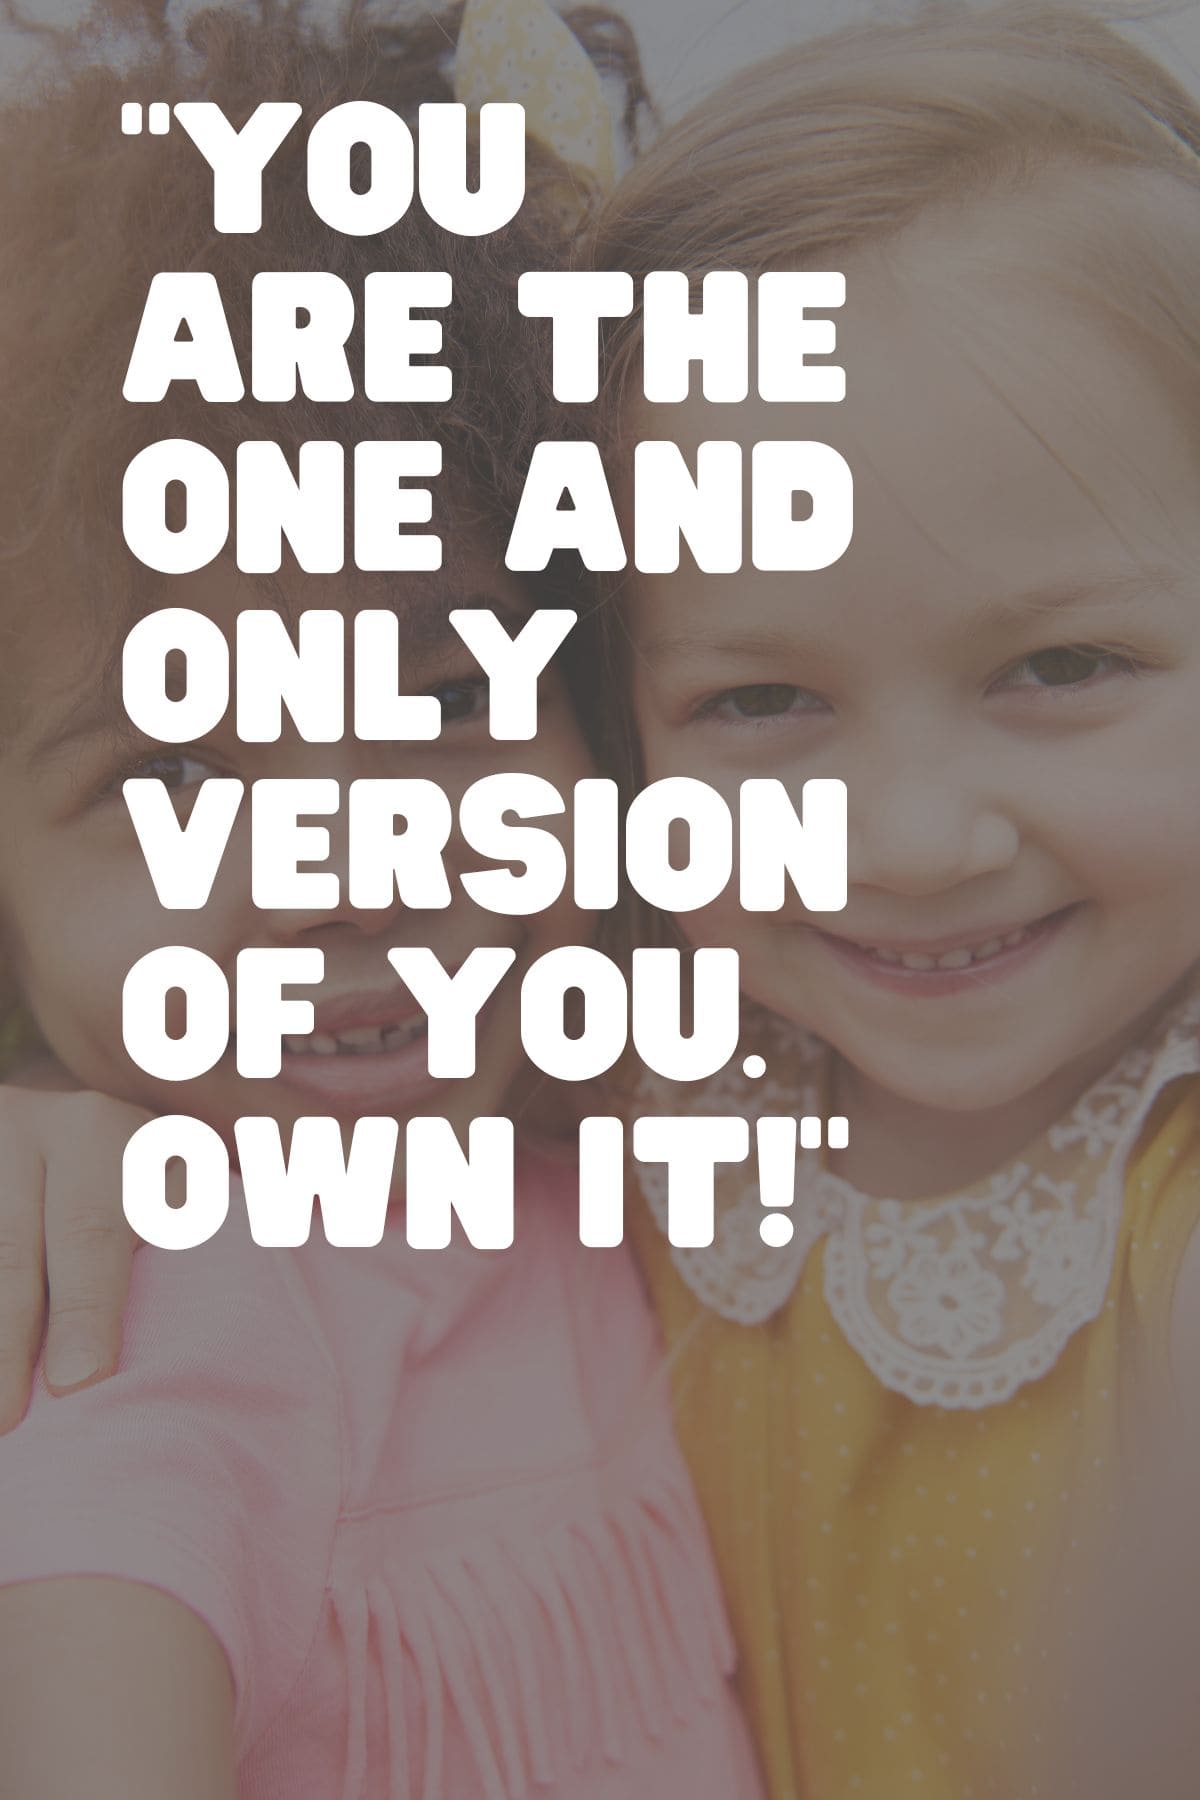 "You are the one and only version of you. Own it!" - Unknown quote for kids